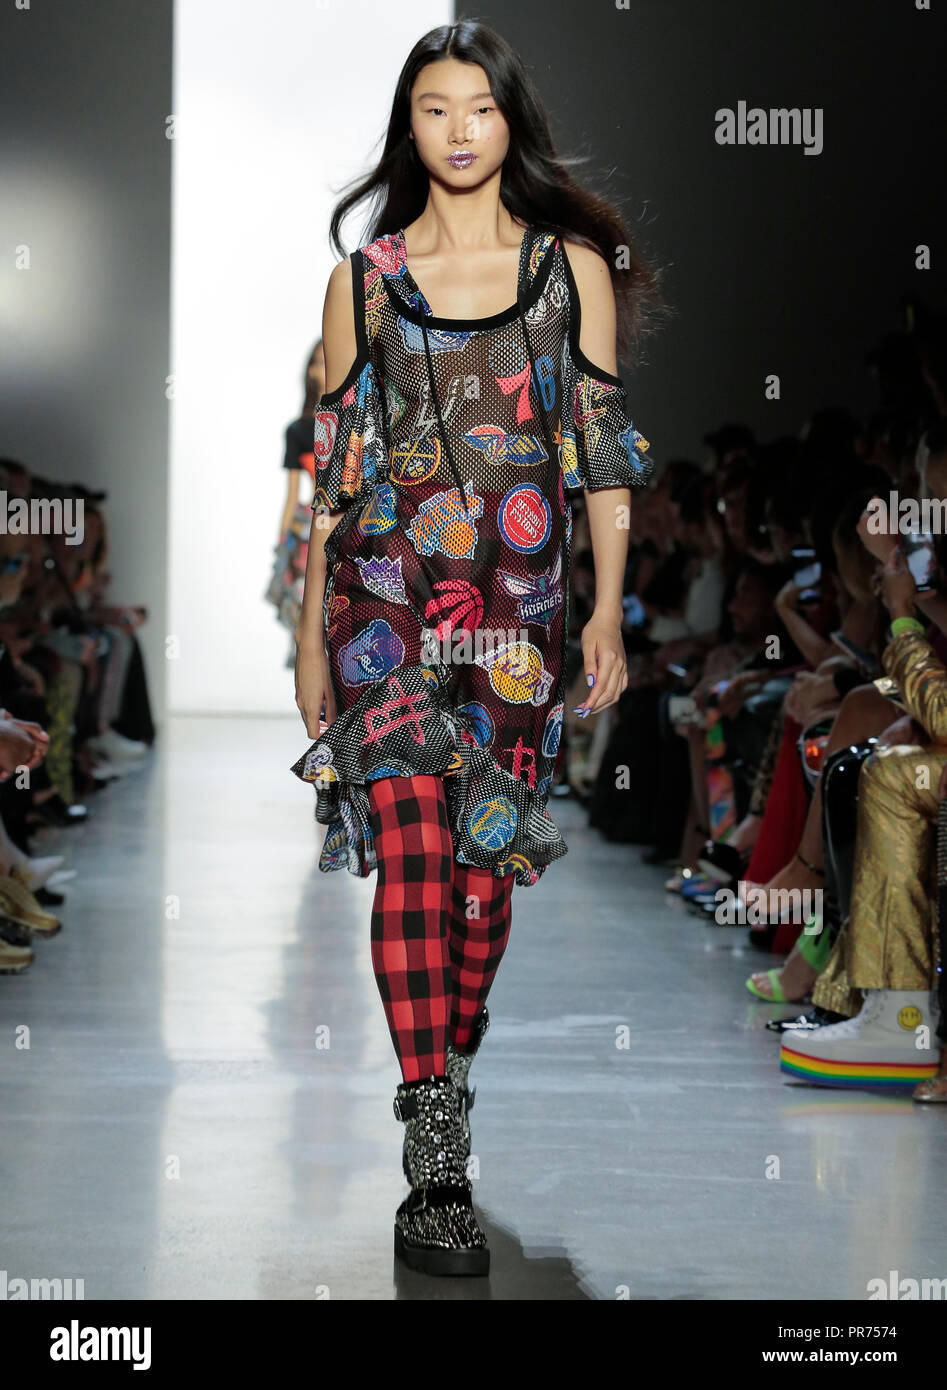 NEW YORK, NY - September 06, 2018: Yoon Young Bae walks the runway at the  Jeremy Scott Spring Summer 2019 fashion show during New York Fashion Week  Stock Photo - Alamy